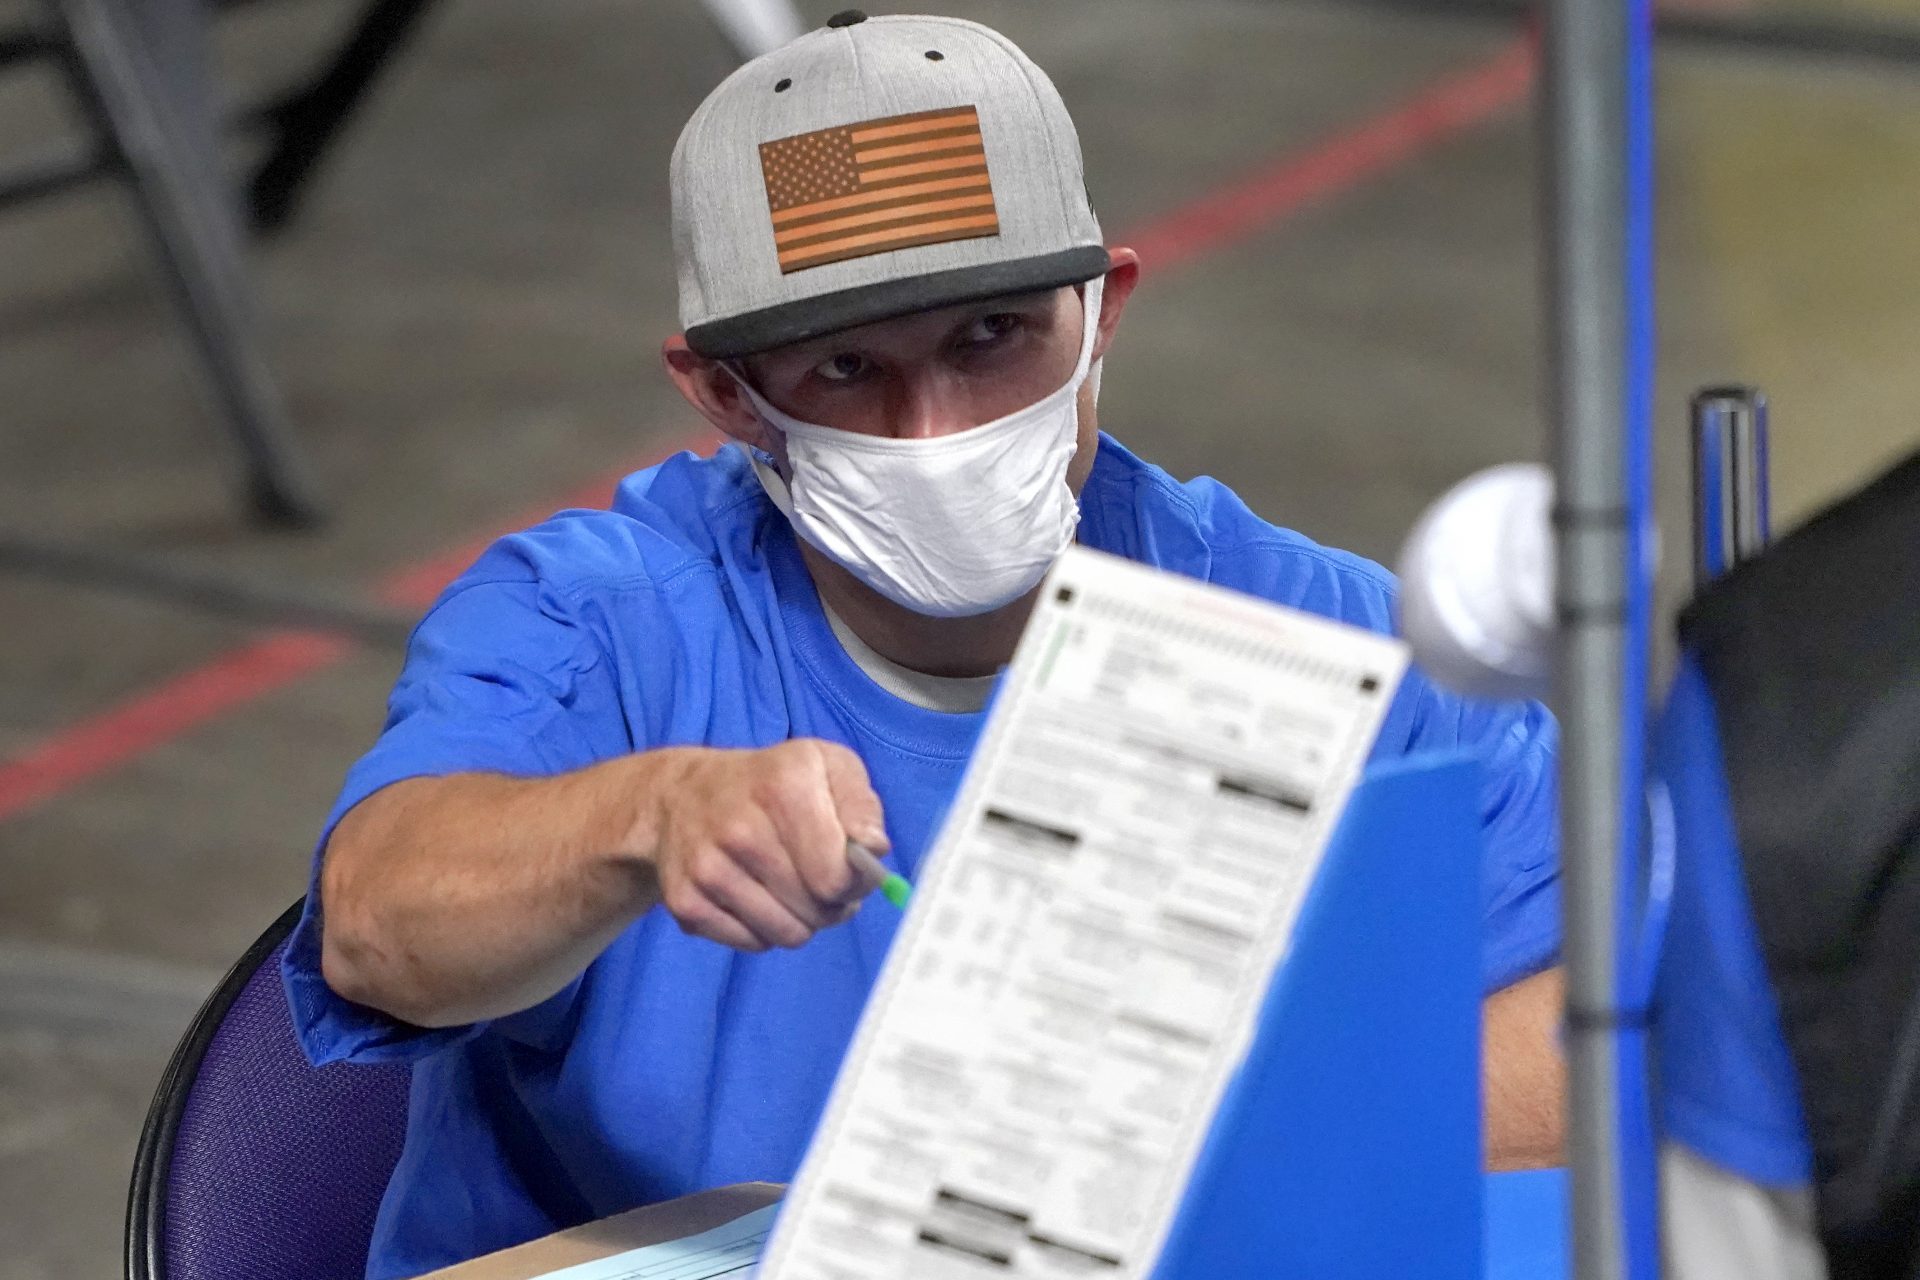 Maricopa County ballots cast in the 2020 general election are examined and recounted by contractors working for Florida-based company, Cyber Ninjas, Thursday, May 6, 2021 at Veterans Memorial Coliseum in Phoenix.